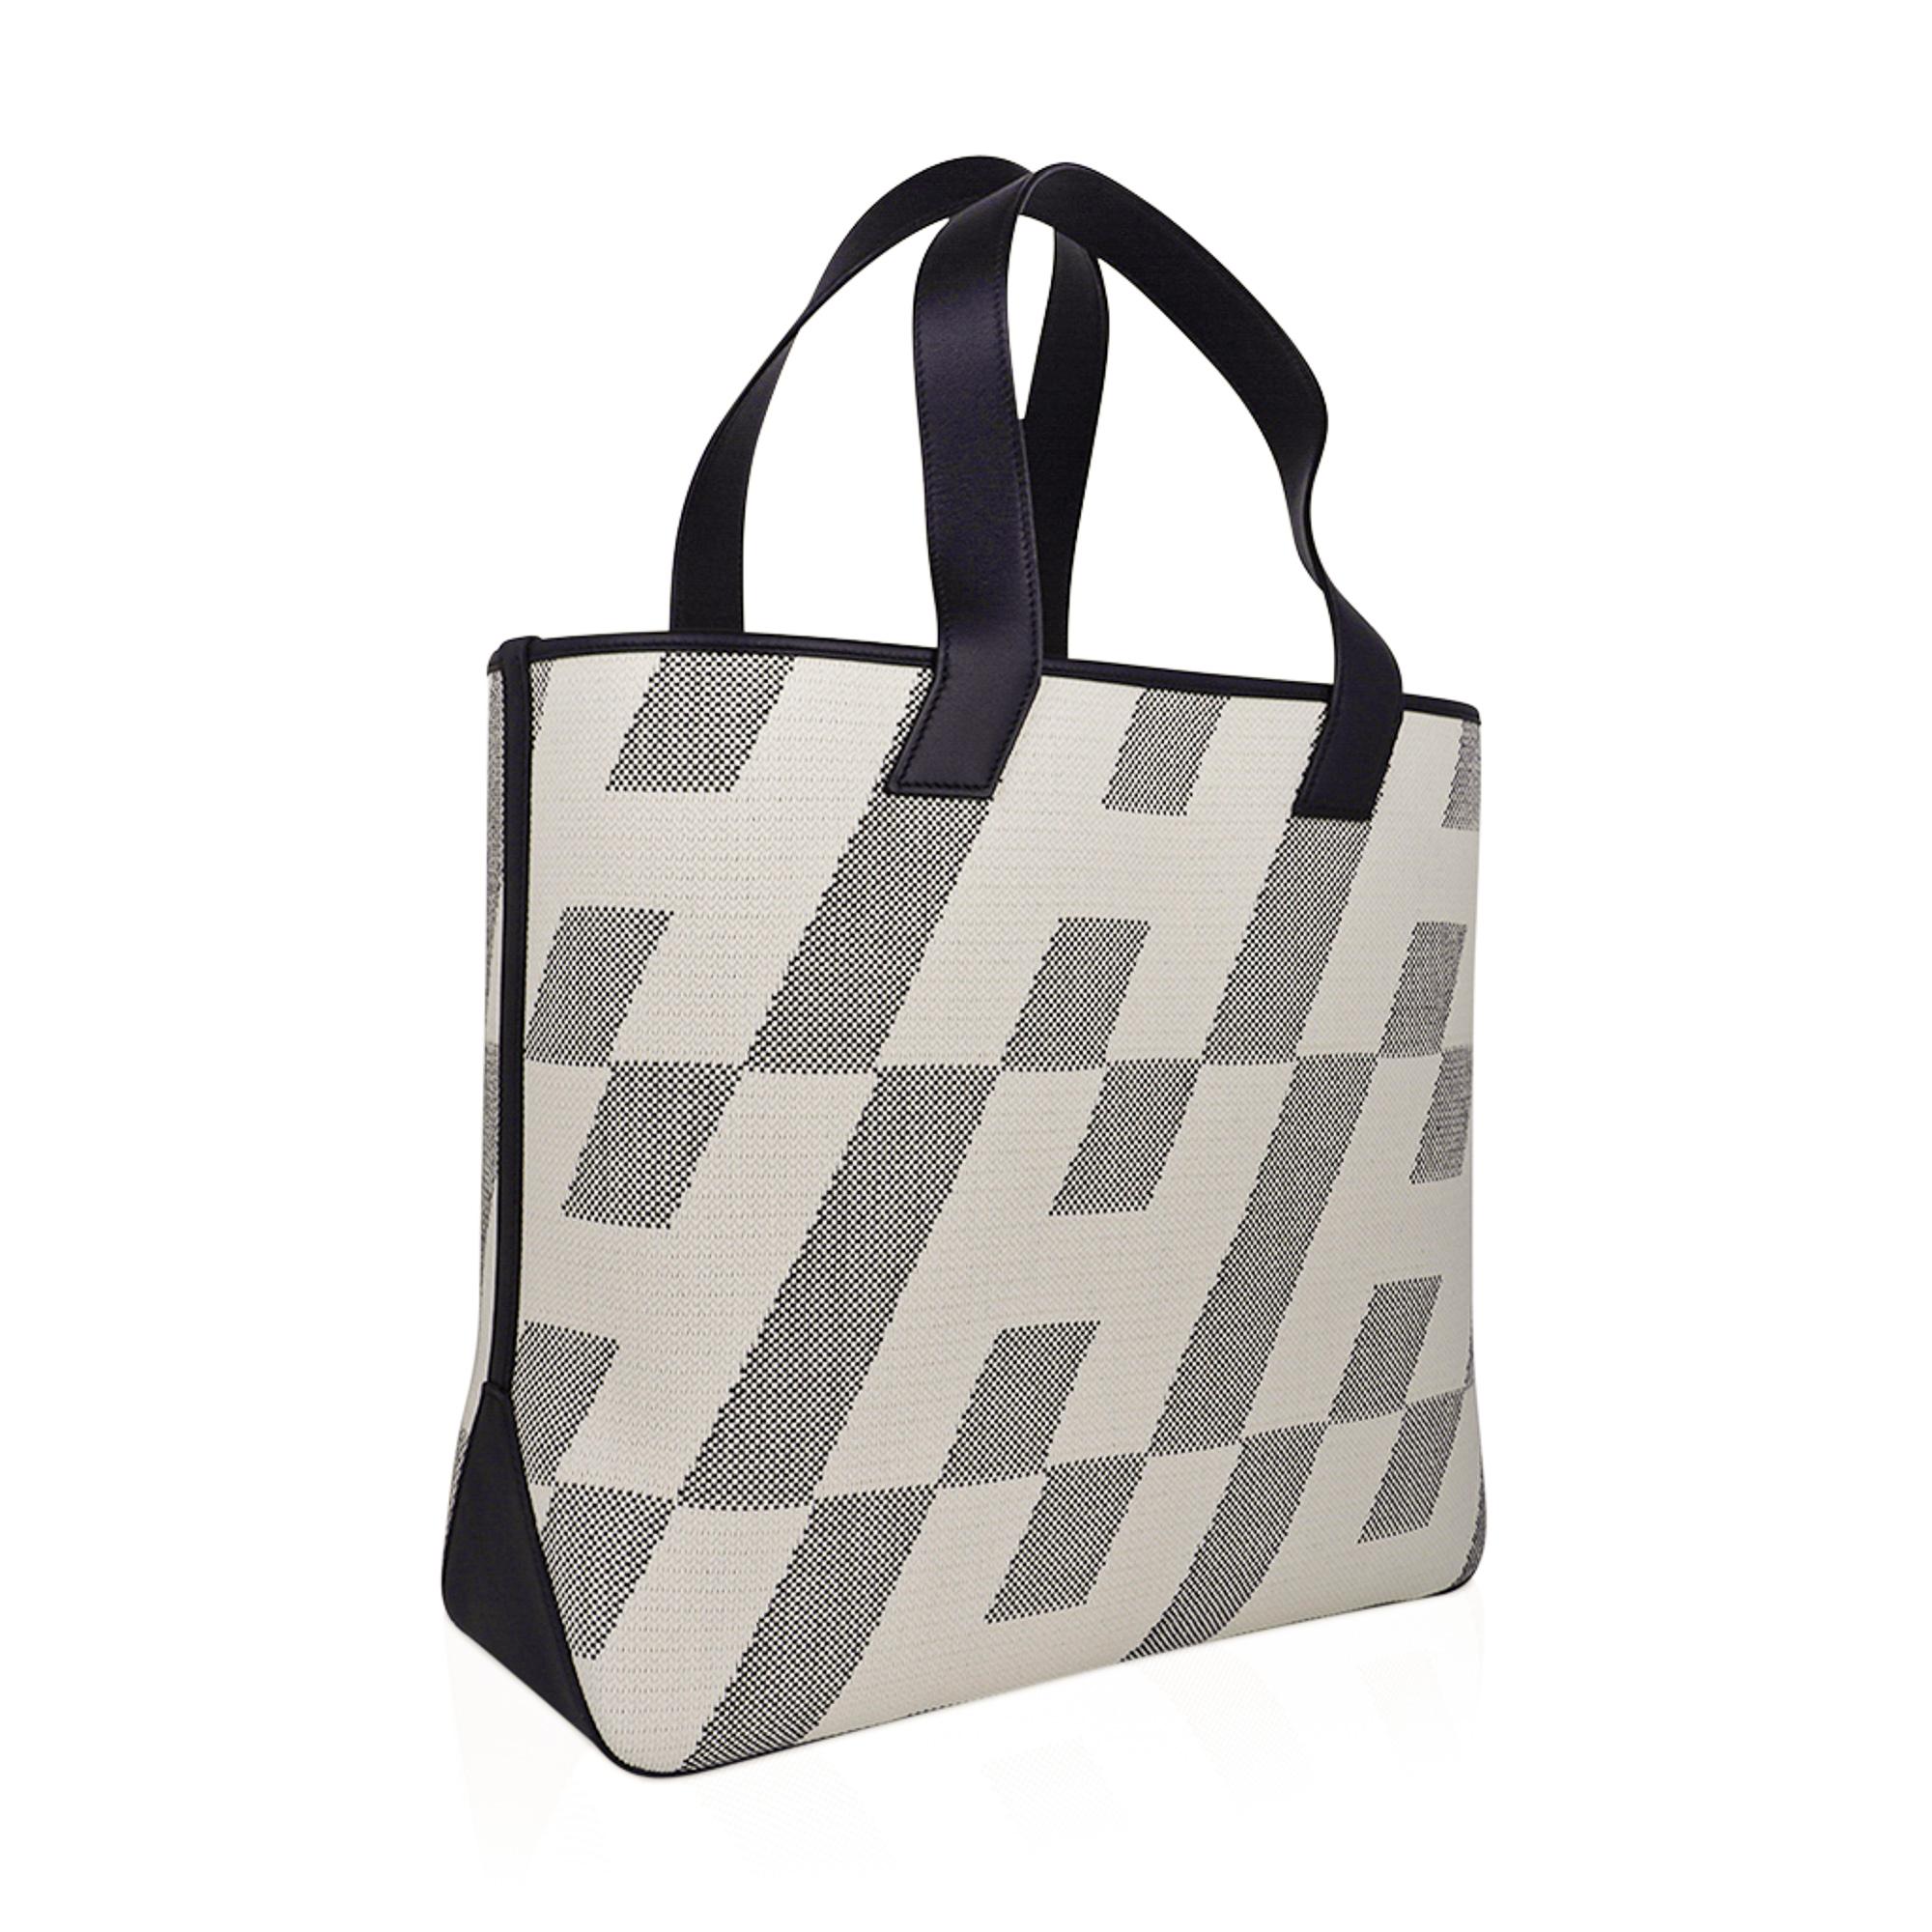 Mightychic offers an Hermes Cabas H En Biais Tote 40 bag featured in Black and Ecru.
Black Swift leather trim.
Lightweight and feminine this Hermes tote bag is the perfect go to summer bag.
Inspired by a 1970 design.
Durable and strong canvas